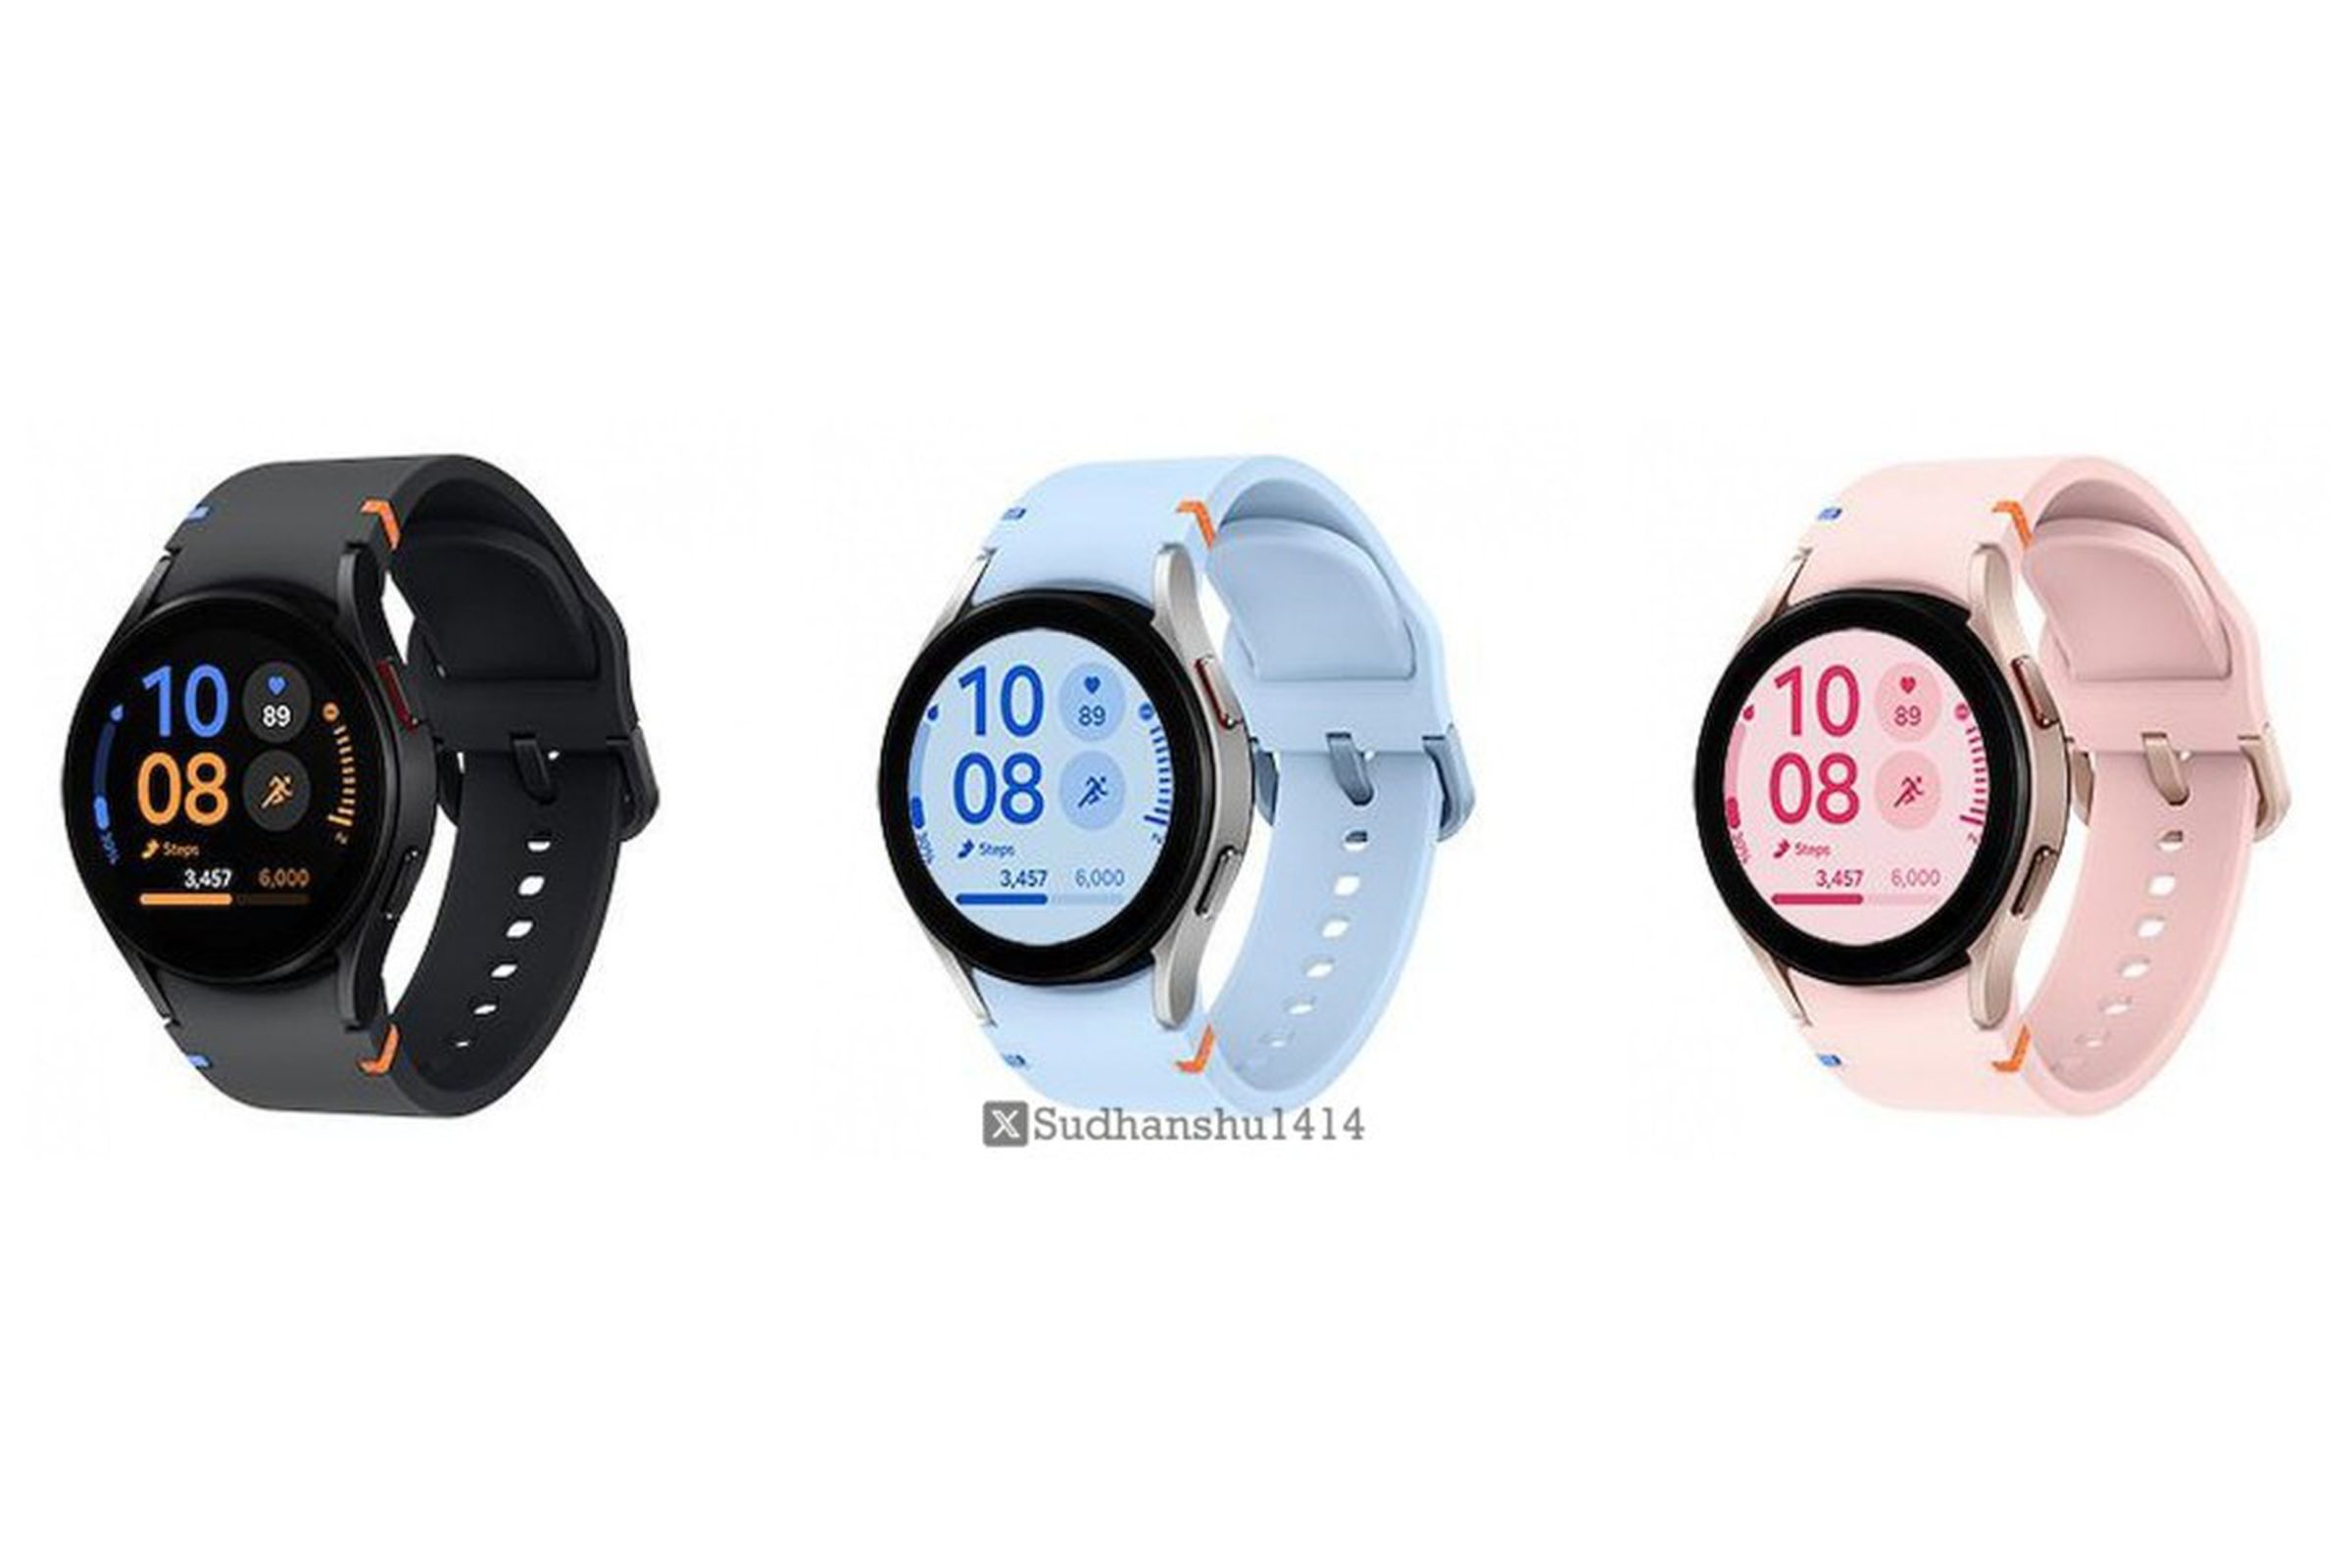 A leaked image showing what appears to be the Samsung Galaxy Watch FE in black, blue, and pink